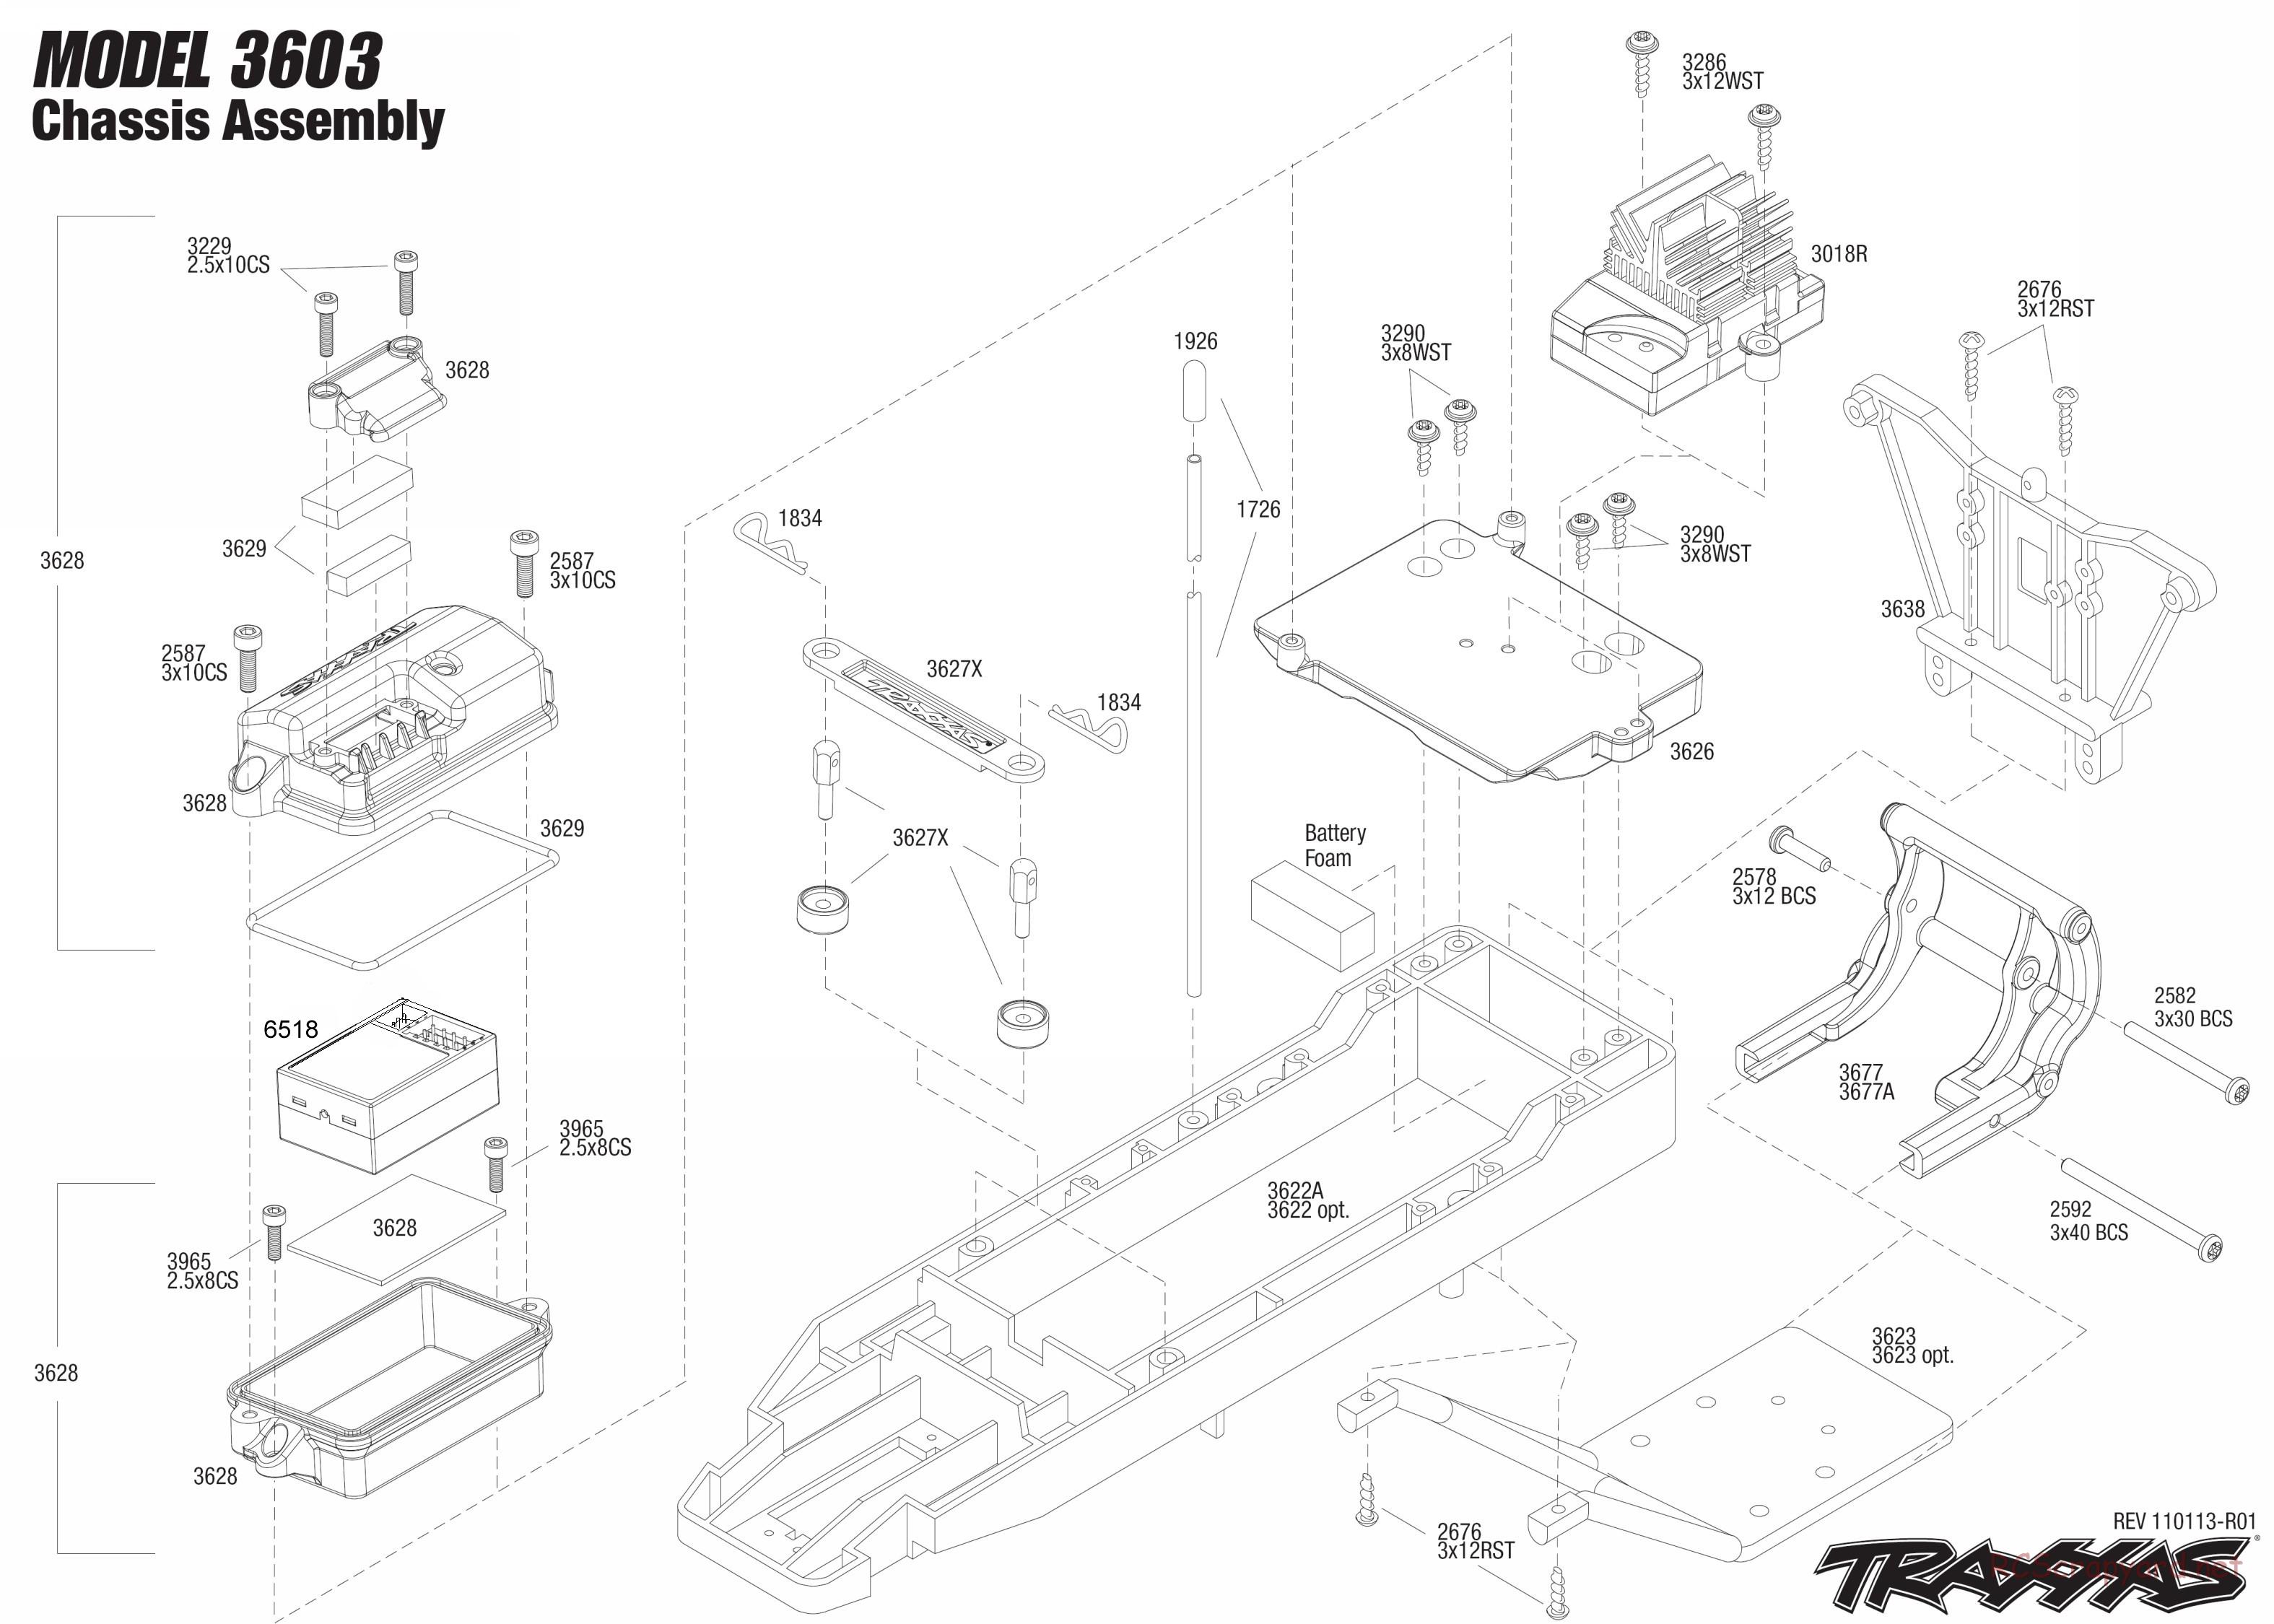 Traxxas - Monster Jam - Grave Digger 30th Anniversary Special - Exploded Views - Page 4